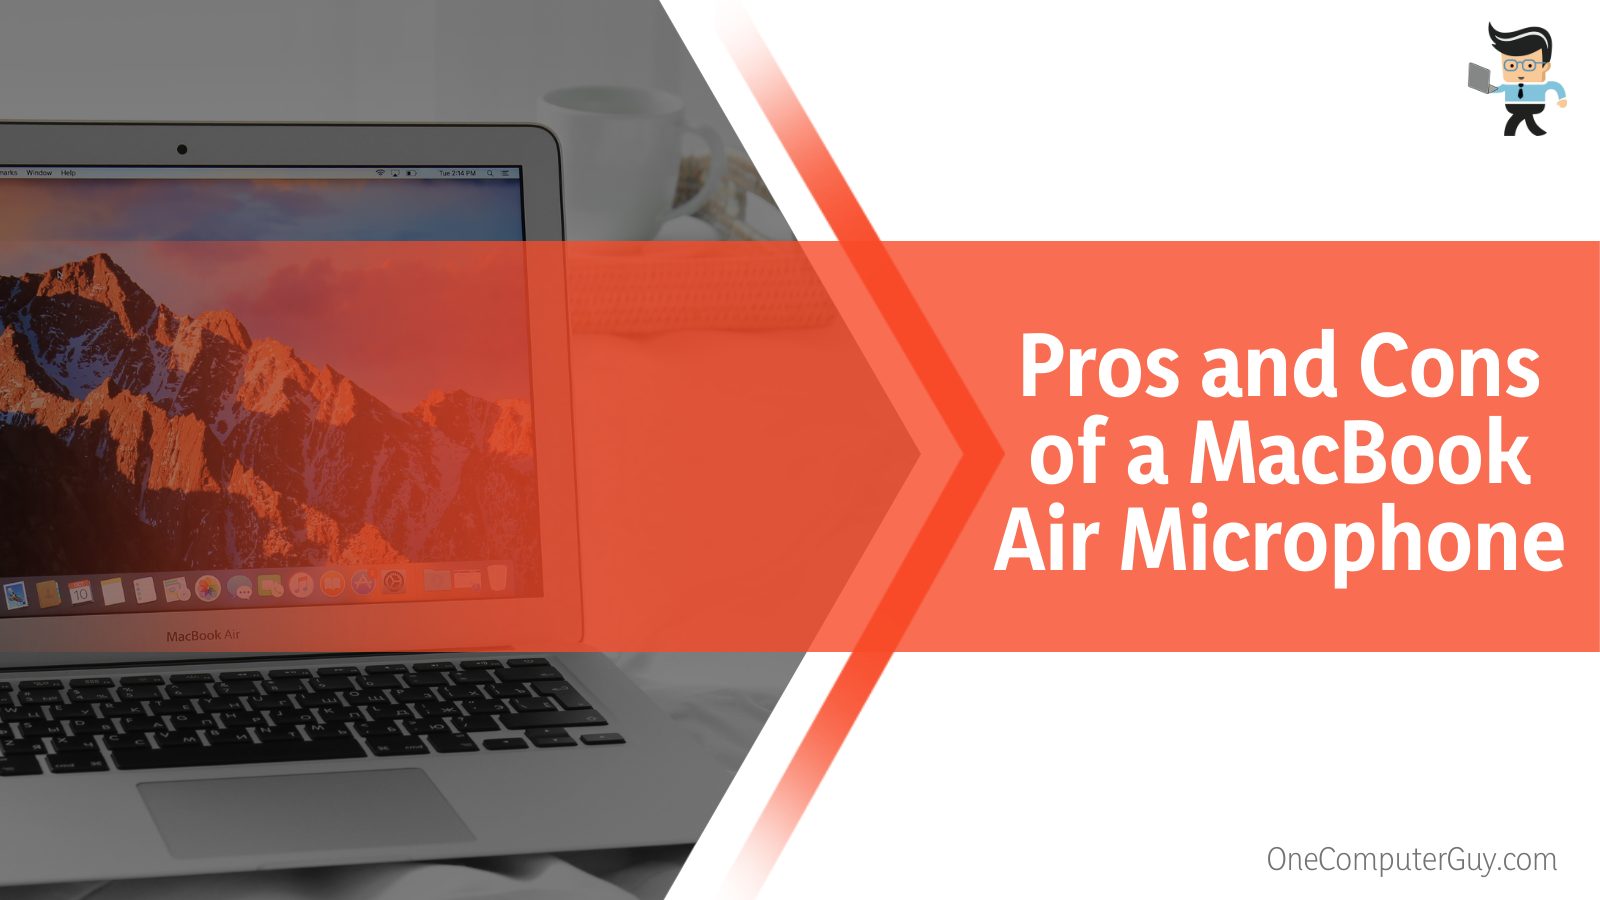 Pros and Cons of a MacBook Air Microphone